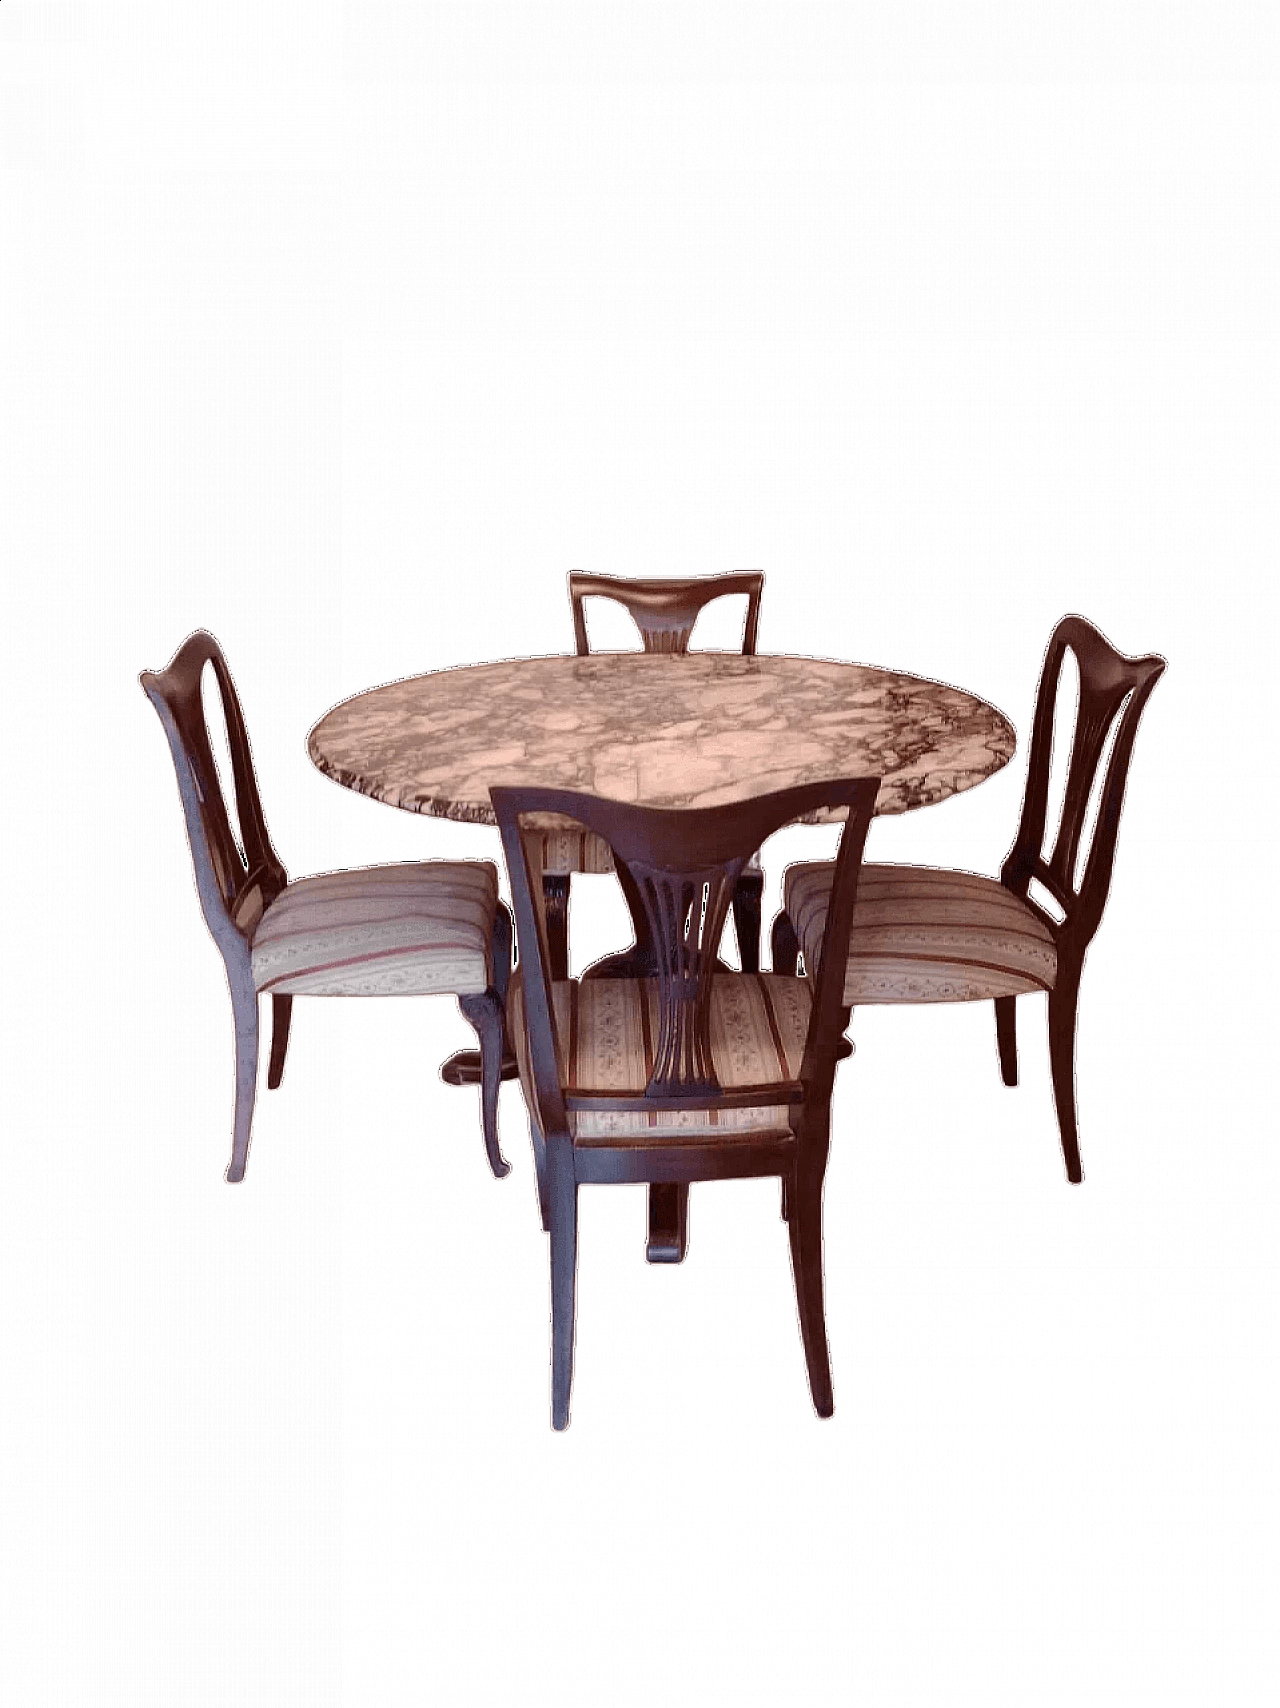 4 Chairs and round table in mahogany and purple Calacatta marble by Fratelli Barni Mobili d'Arte Seveso, 1950s 23